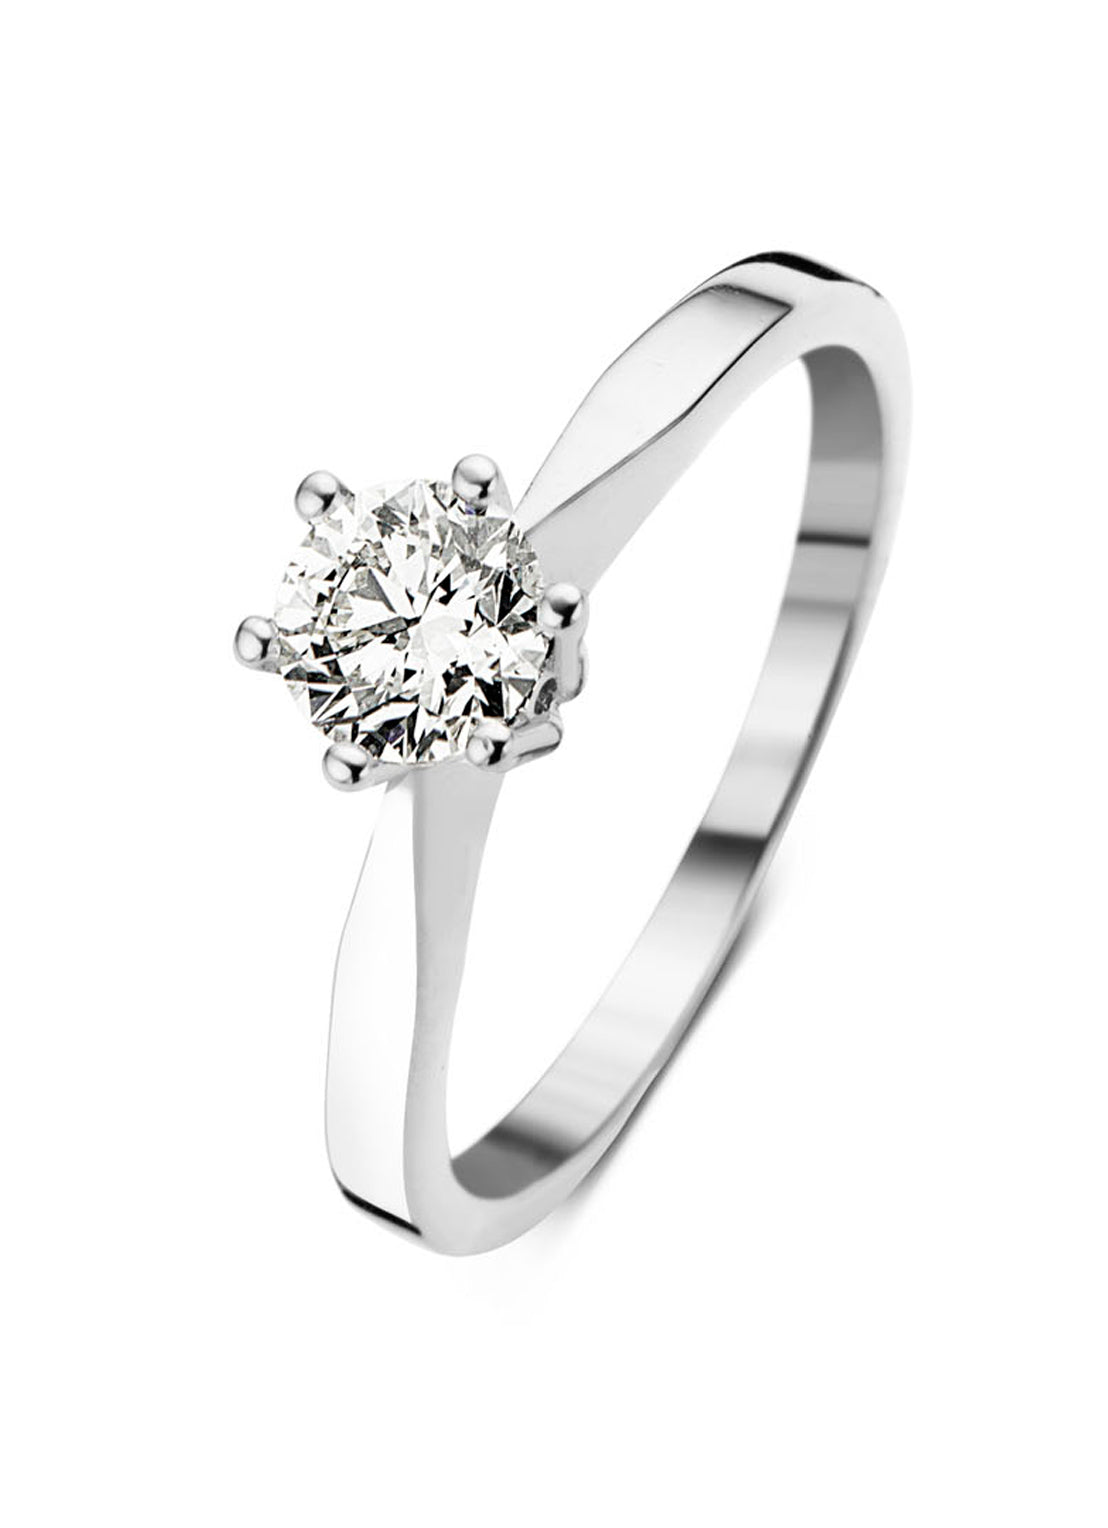 White gold solitaire ring, half carat